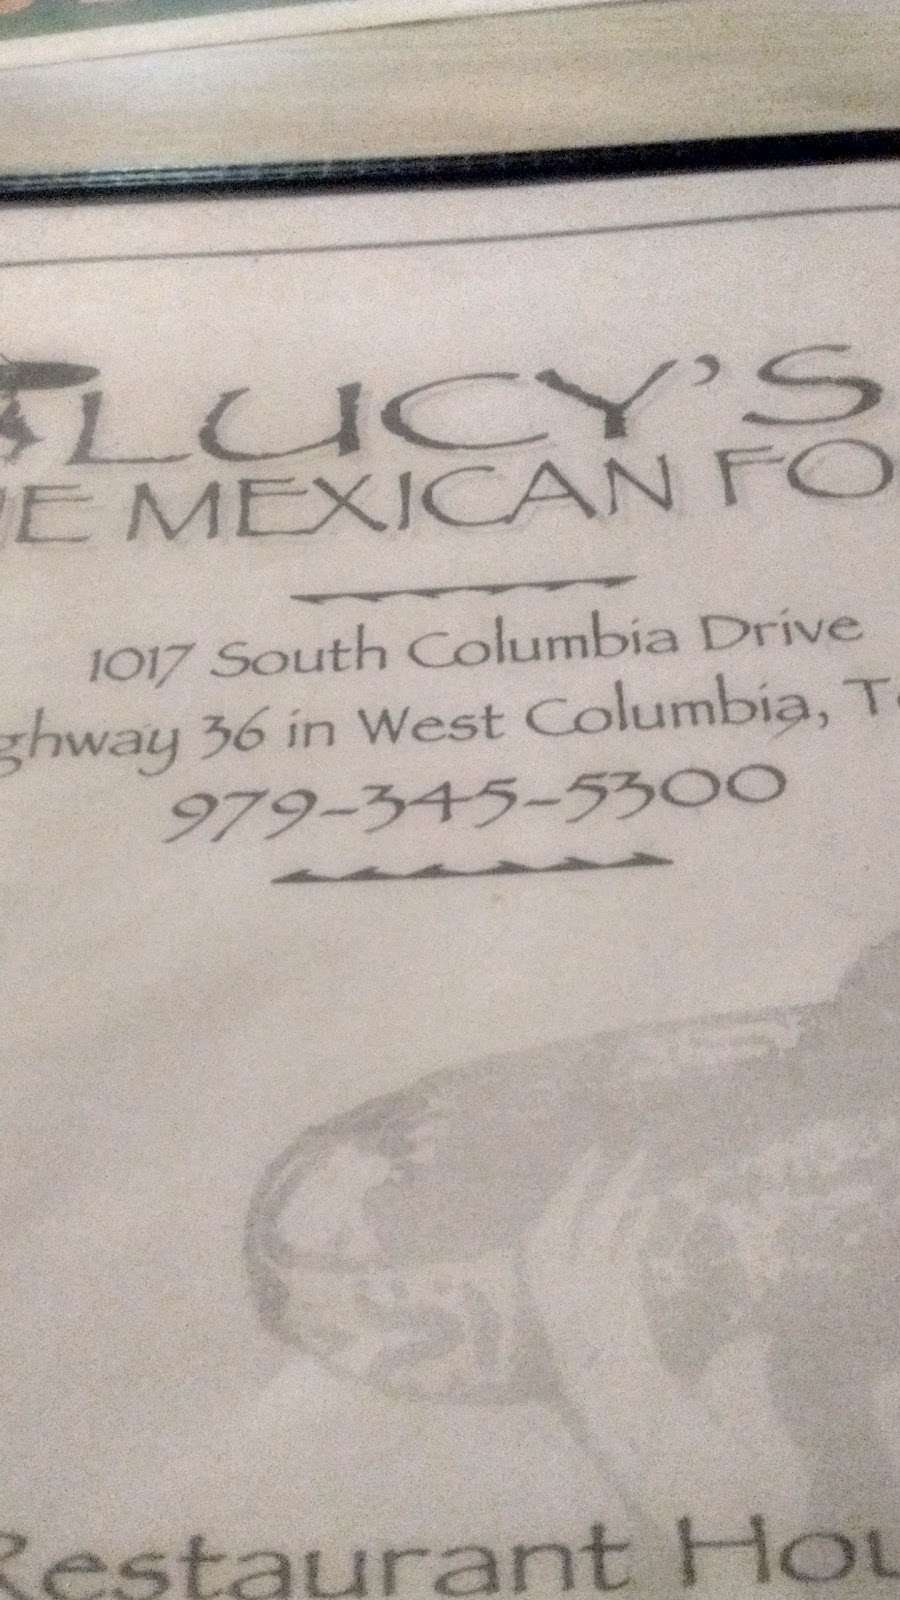 Lucys Mexican Restaurant | 1017 S Columbia Dr, West Columbia, TX 77486 | Phone: (979) 345-5300